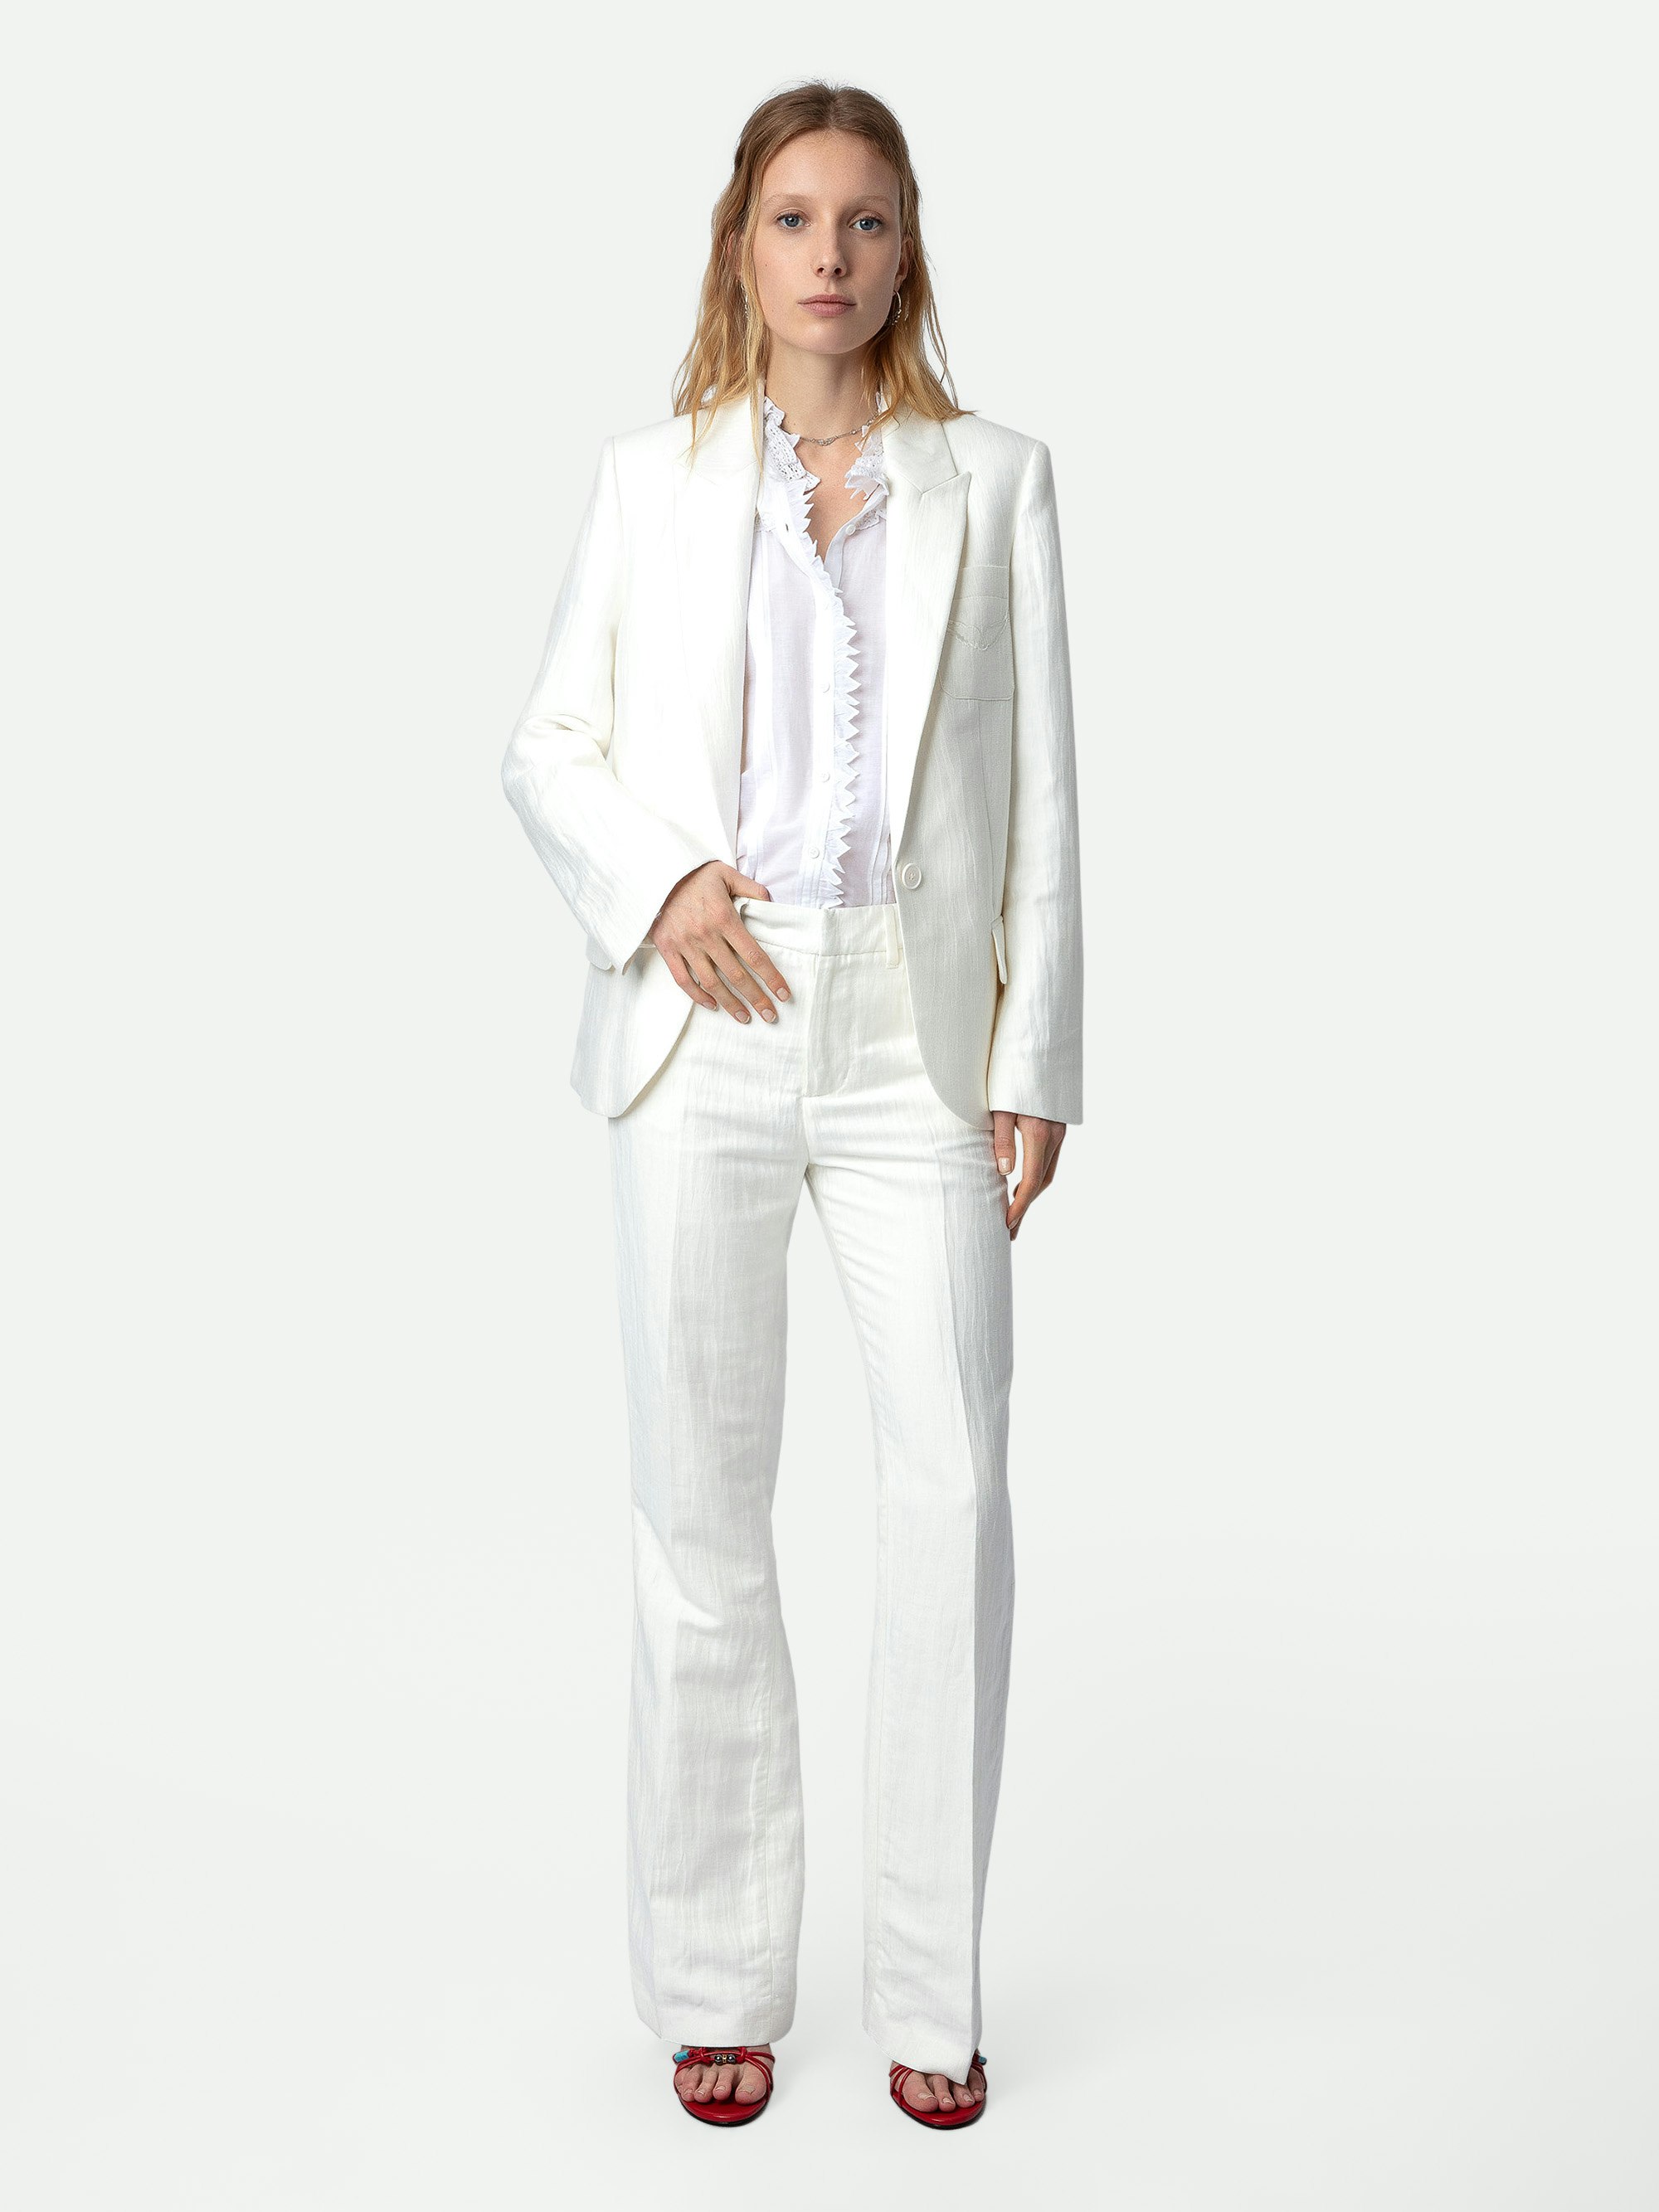 Vow Blazer - White tailored blazer with tailored collar, button closure and pockets with wings motif.